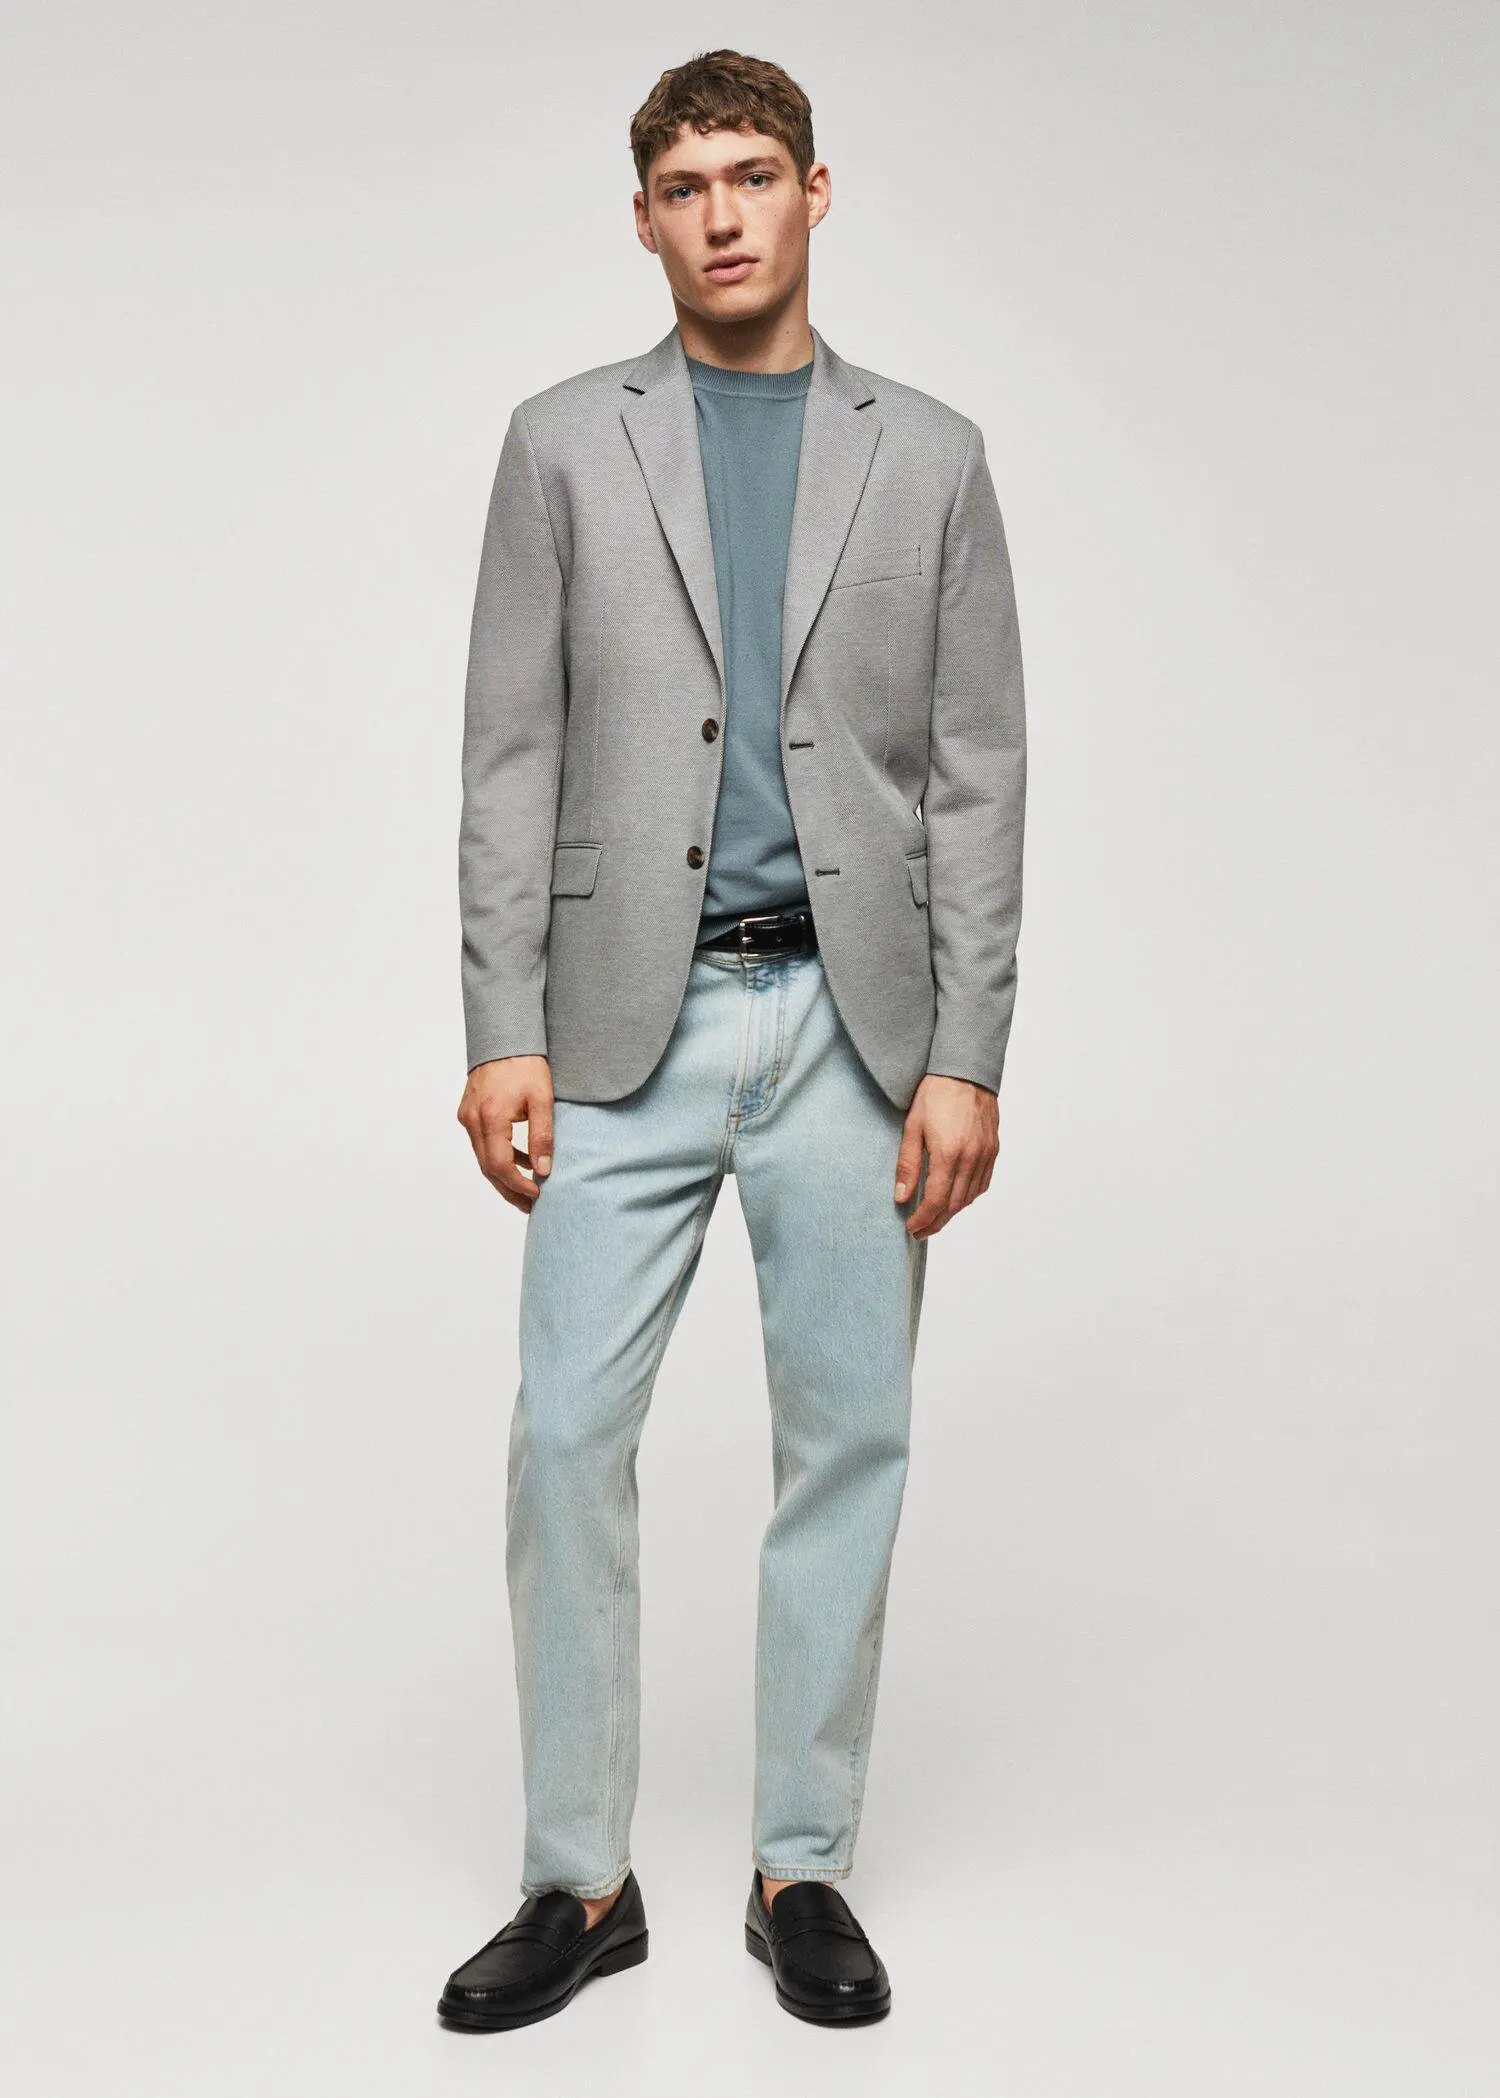 Mango Slim fit microstructure blazer. a man wearing a gray jacket and light blue pants. 